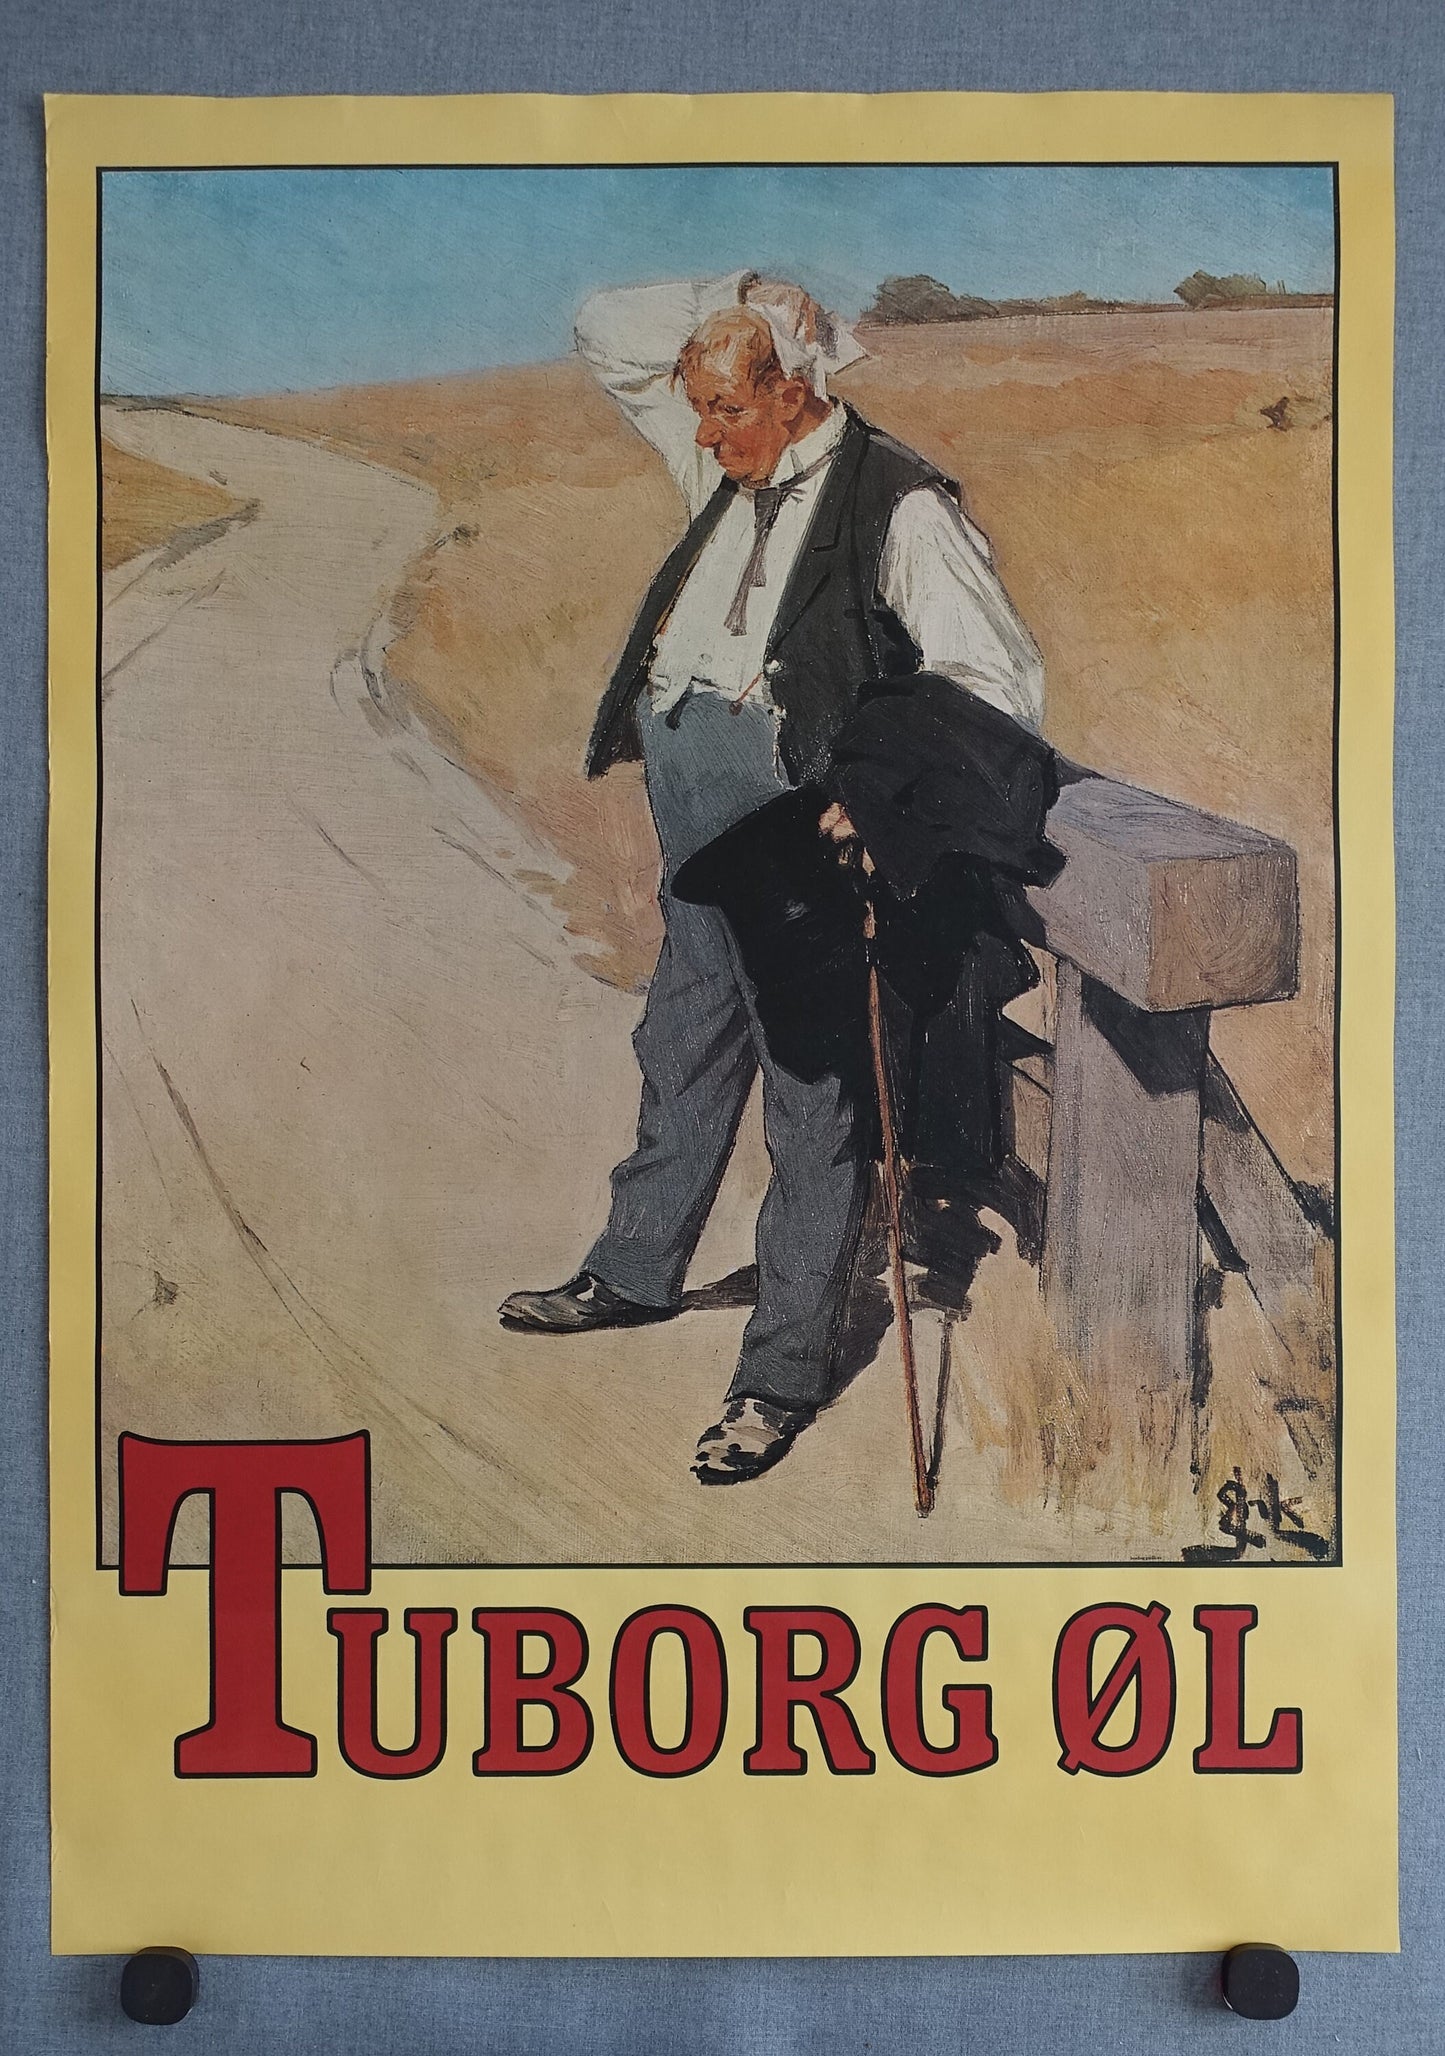 1960s Tuborg Beer Commercial "The Thirsty Man" - Original Vintage Poster